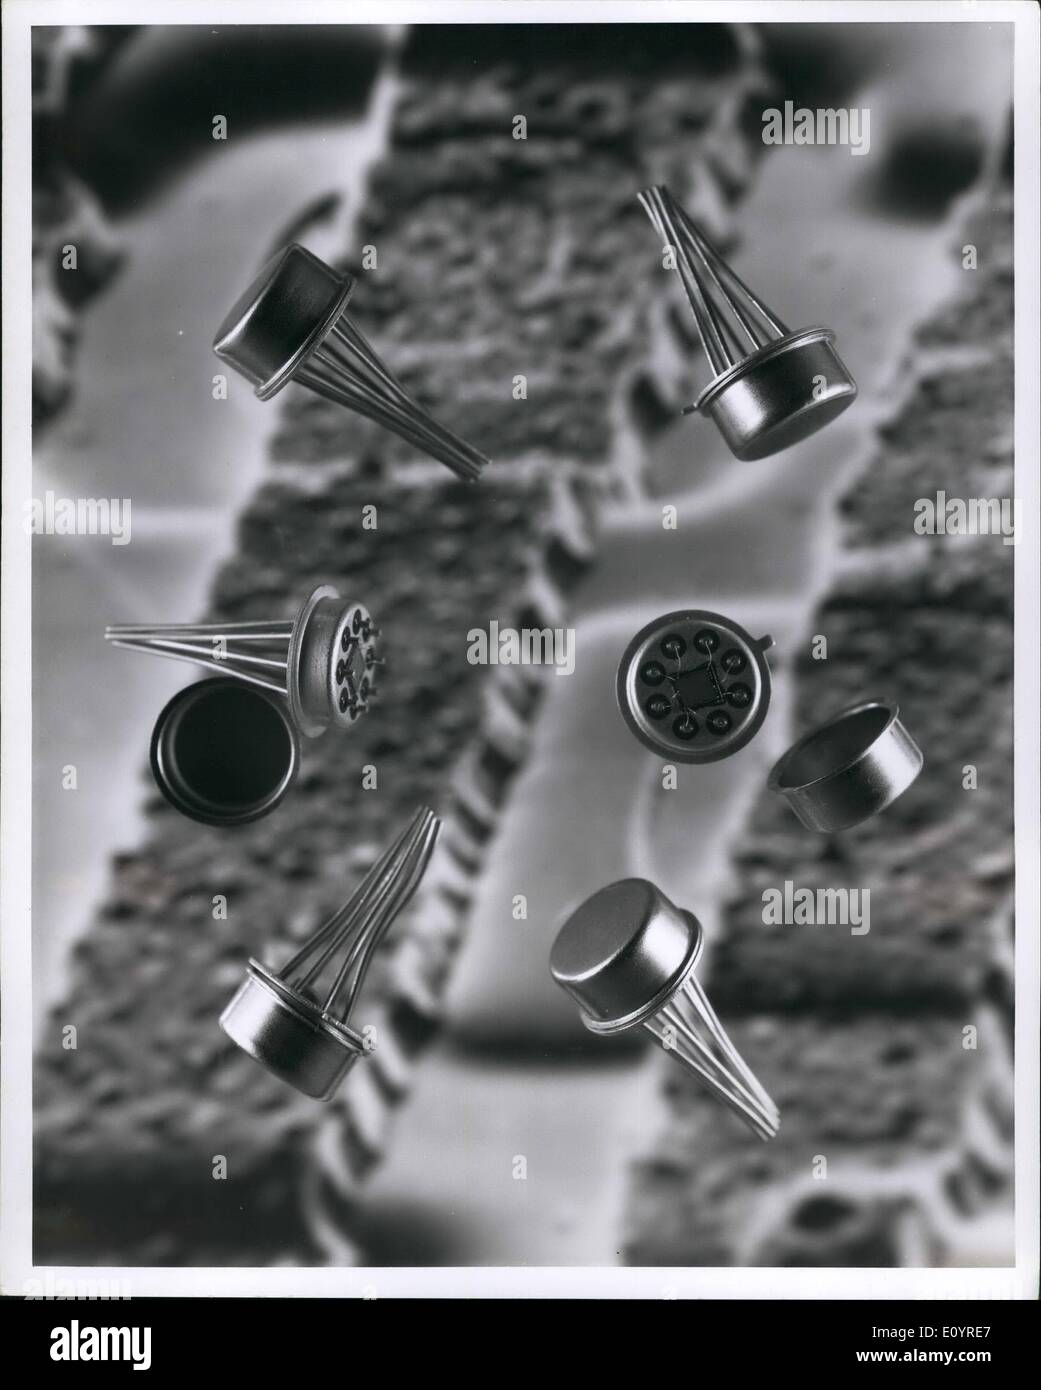 Apr. 04, 1971 - A handful of GER 2507's, a 5 MHz dual 100-bit shift register, is superimposed on a chip photo taken with a scanning electron microscope. This photomicrograph enlarges an area corresponding to approximately one bit and shows the uniformity of General Electric's new Refractory Metal Oxide Semiconductor Process (RMOS) Stock Photo